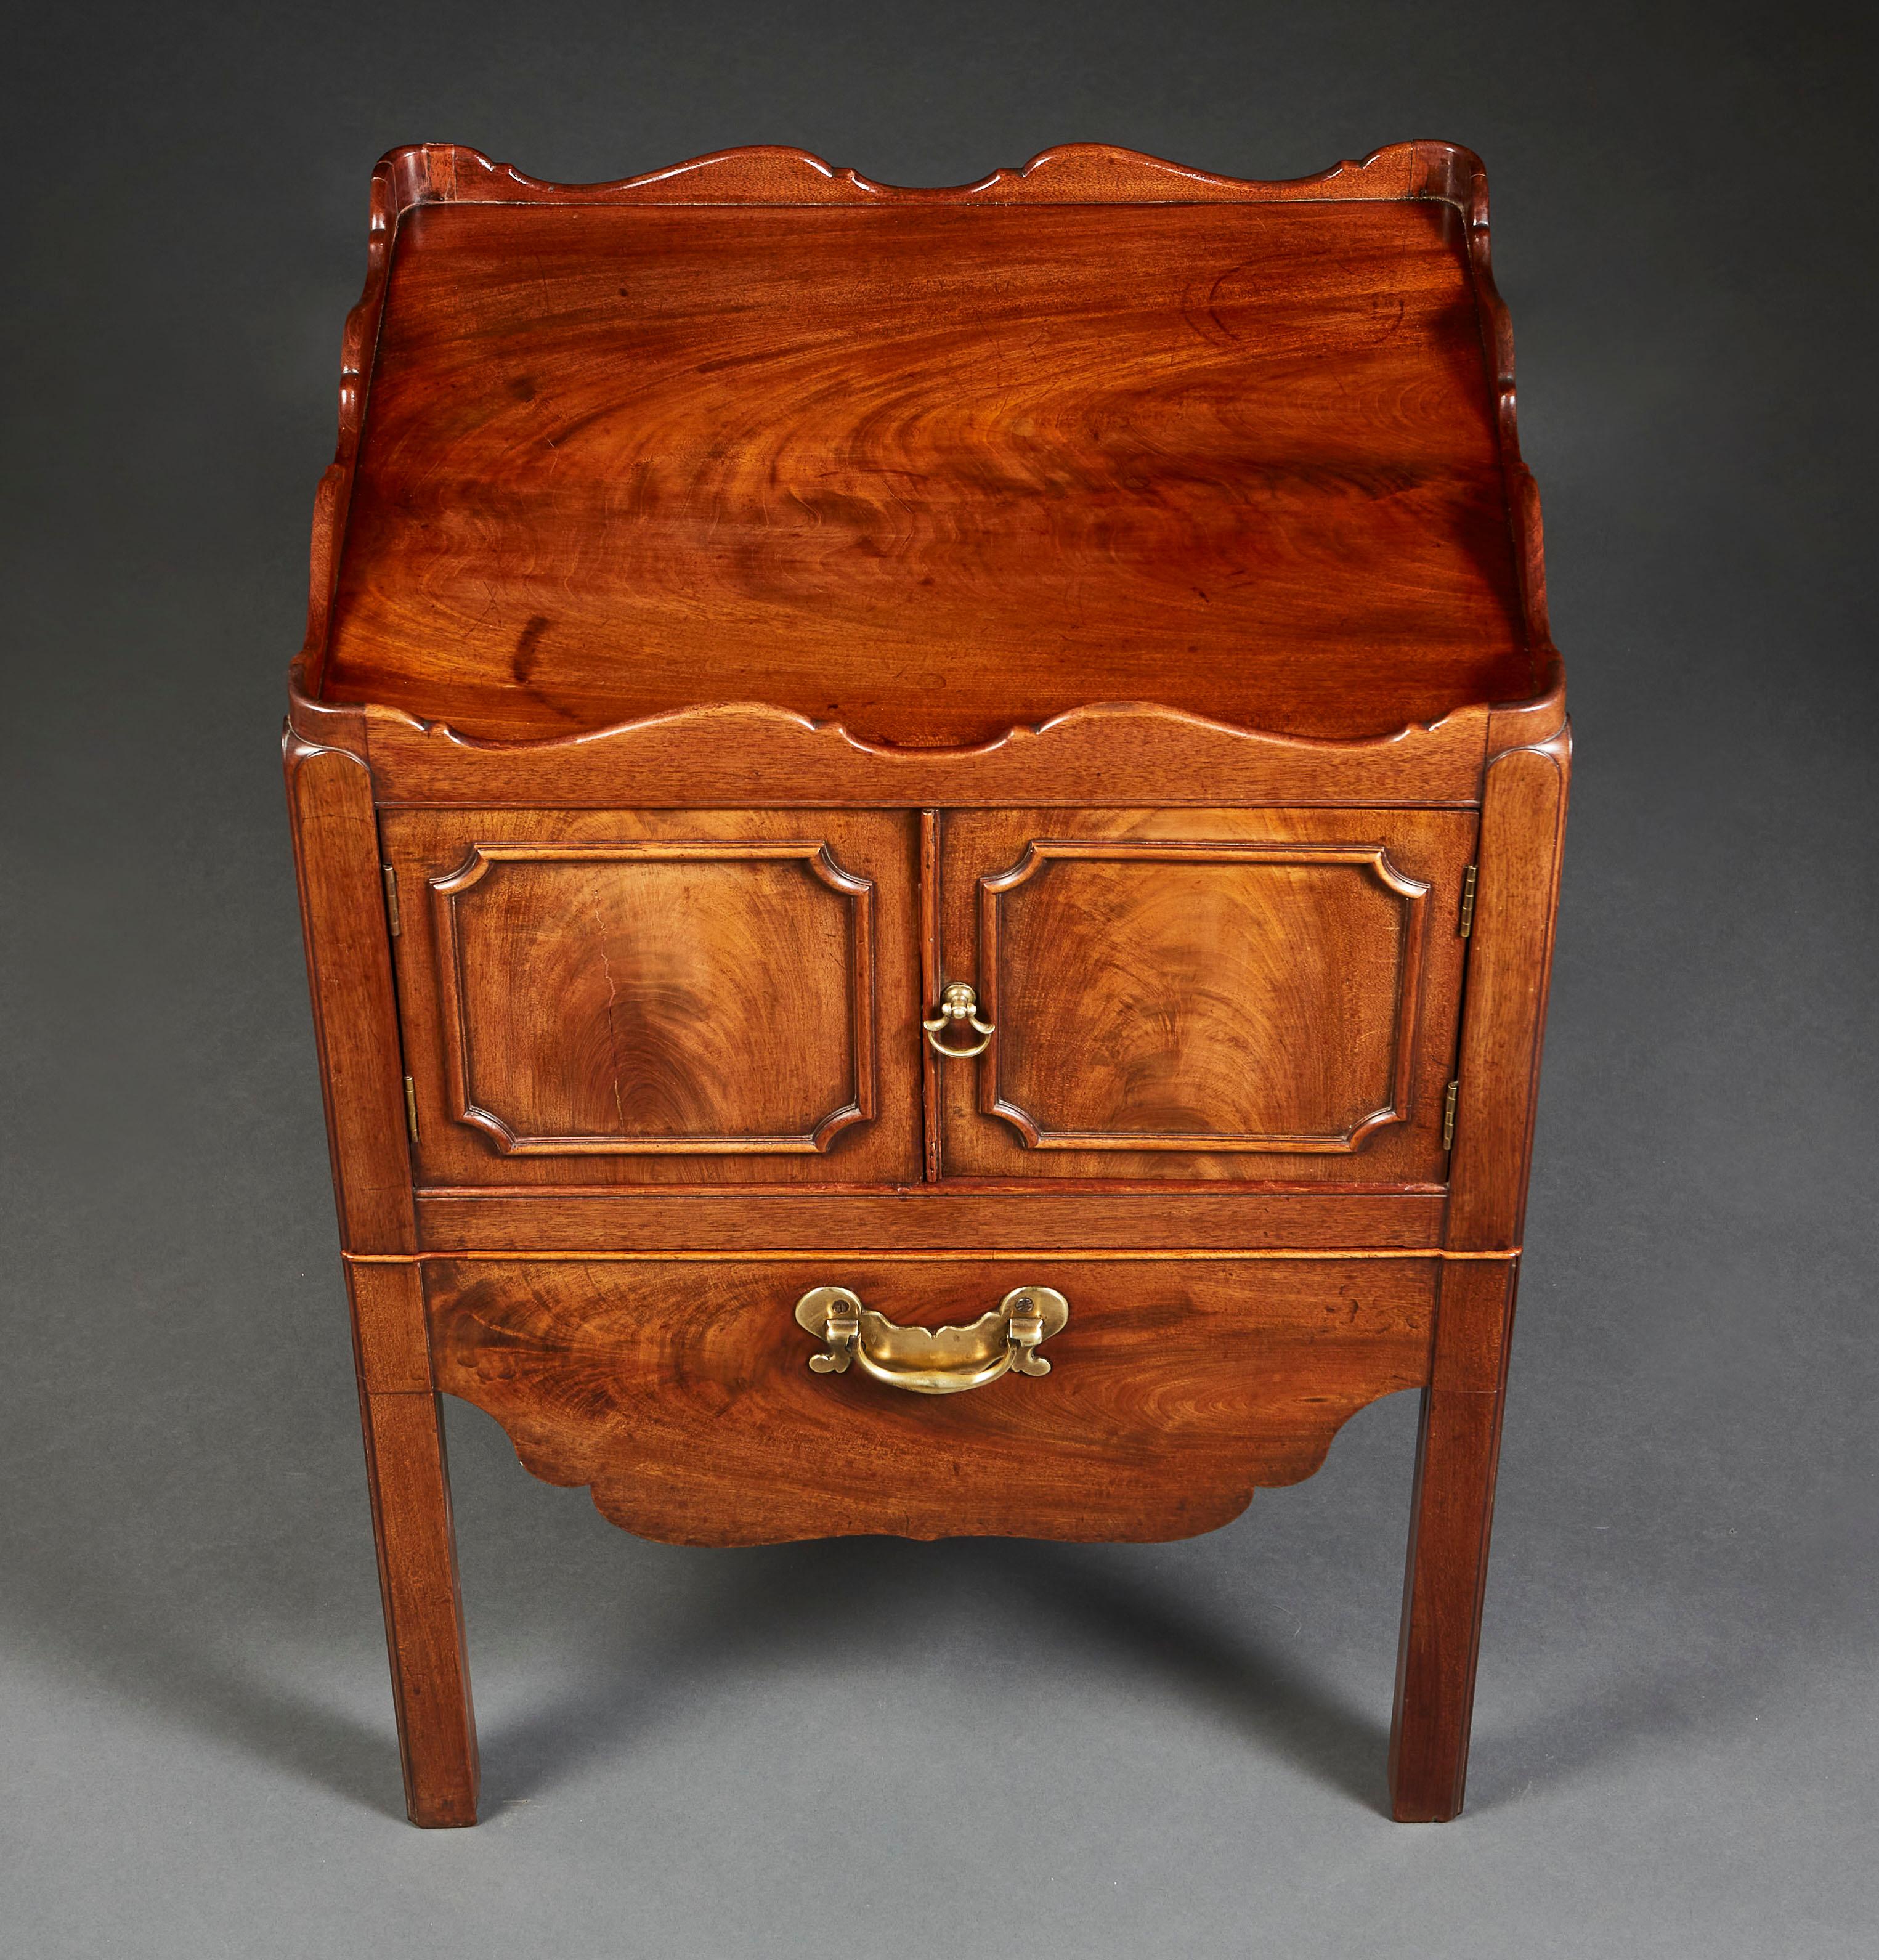 A George III flame mahogany bedside cabinet with flame mahogany timber, opening with two doors and a single drawer to the front, with original brass handles, and undulating gallery to the top.

 